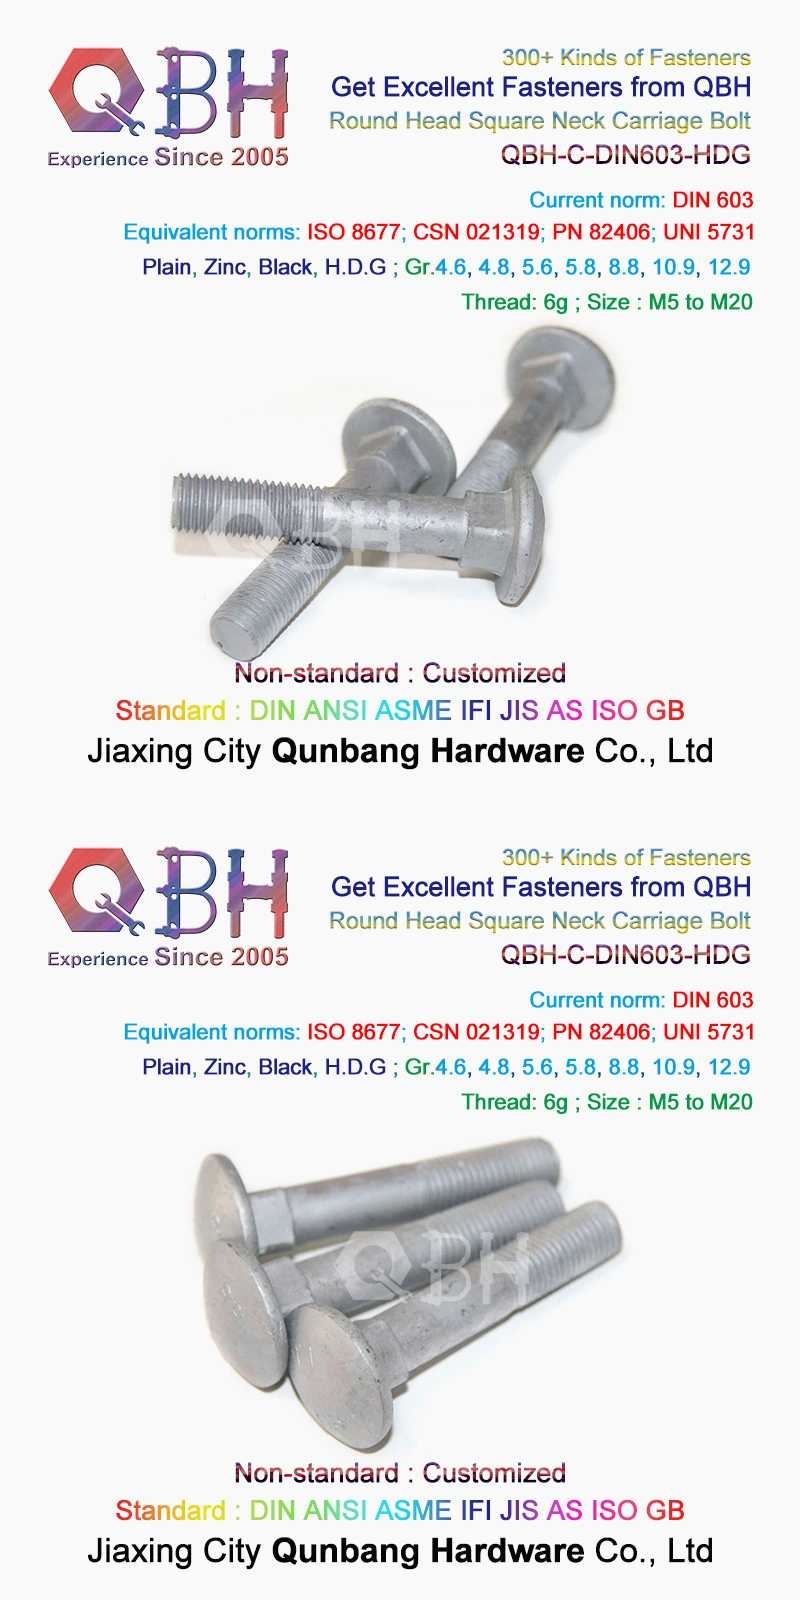 Qbh Round Head Square Neck Carriage Bolt DIN603 Carbon Steel Wzp